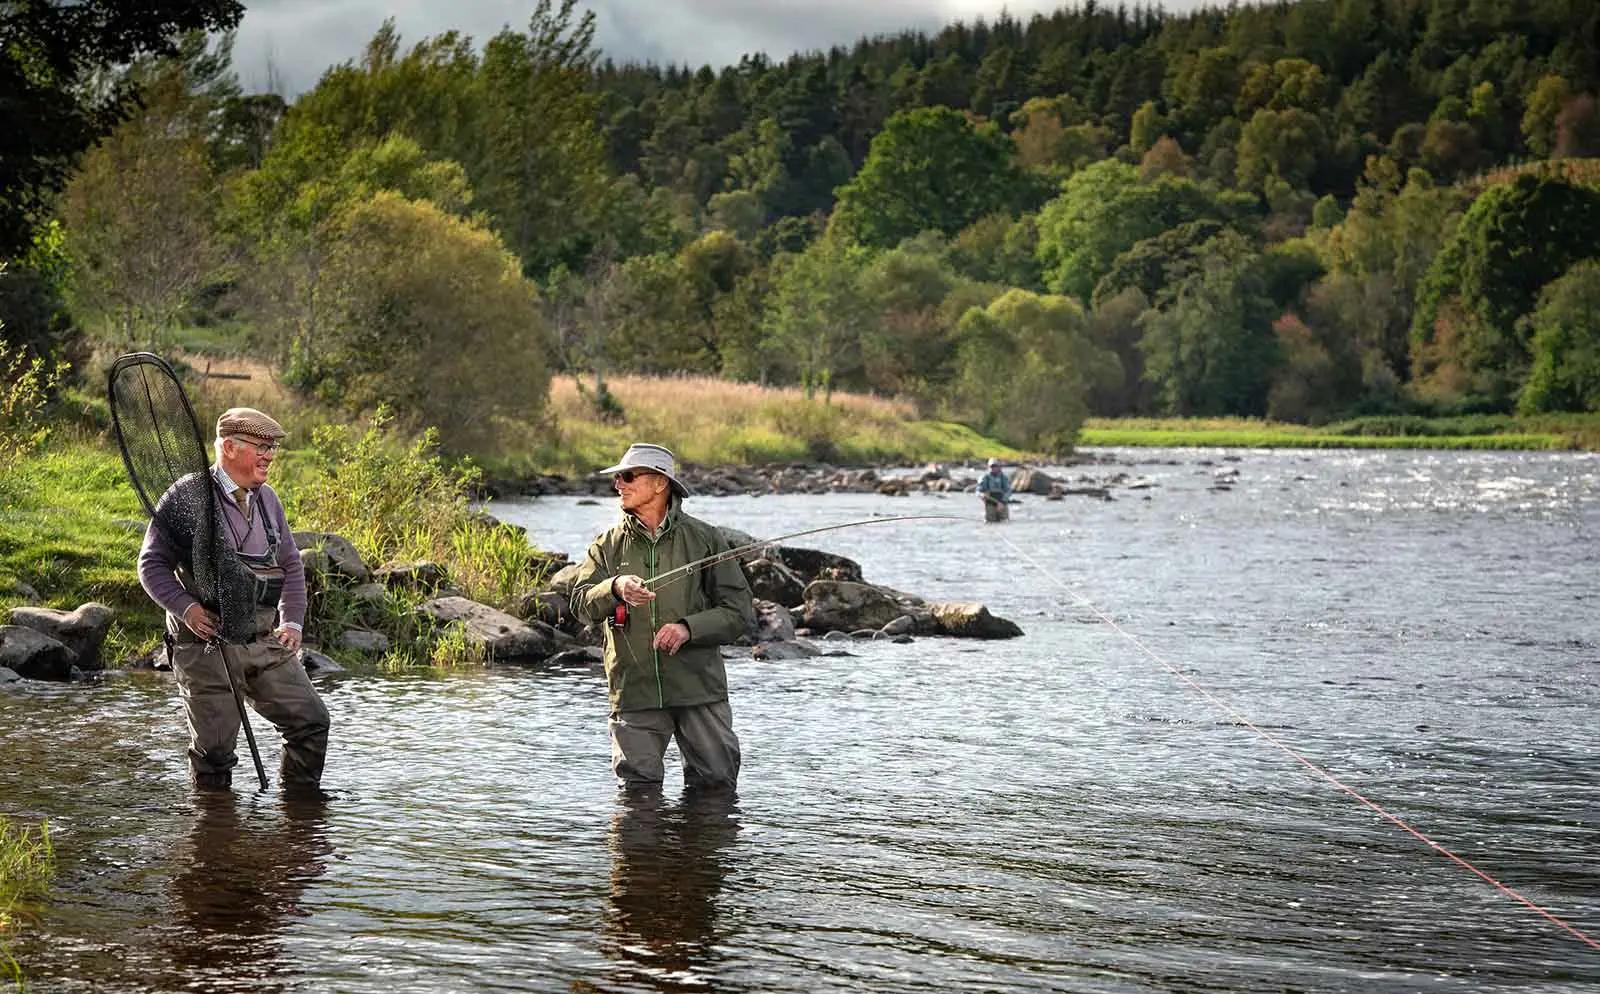 Fly Fishing in Scotland, an overview for American guests